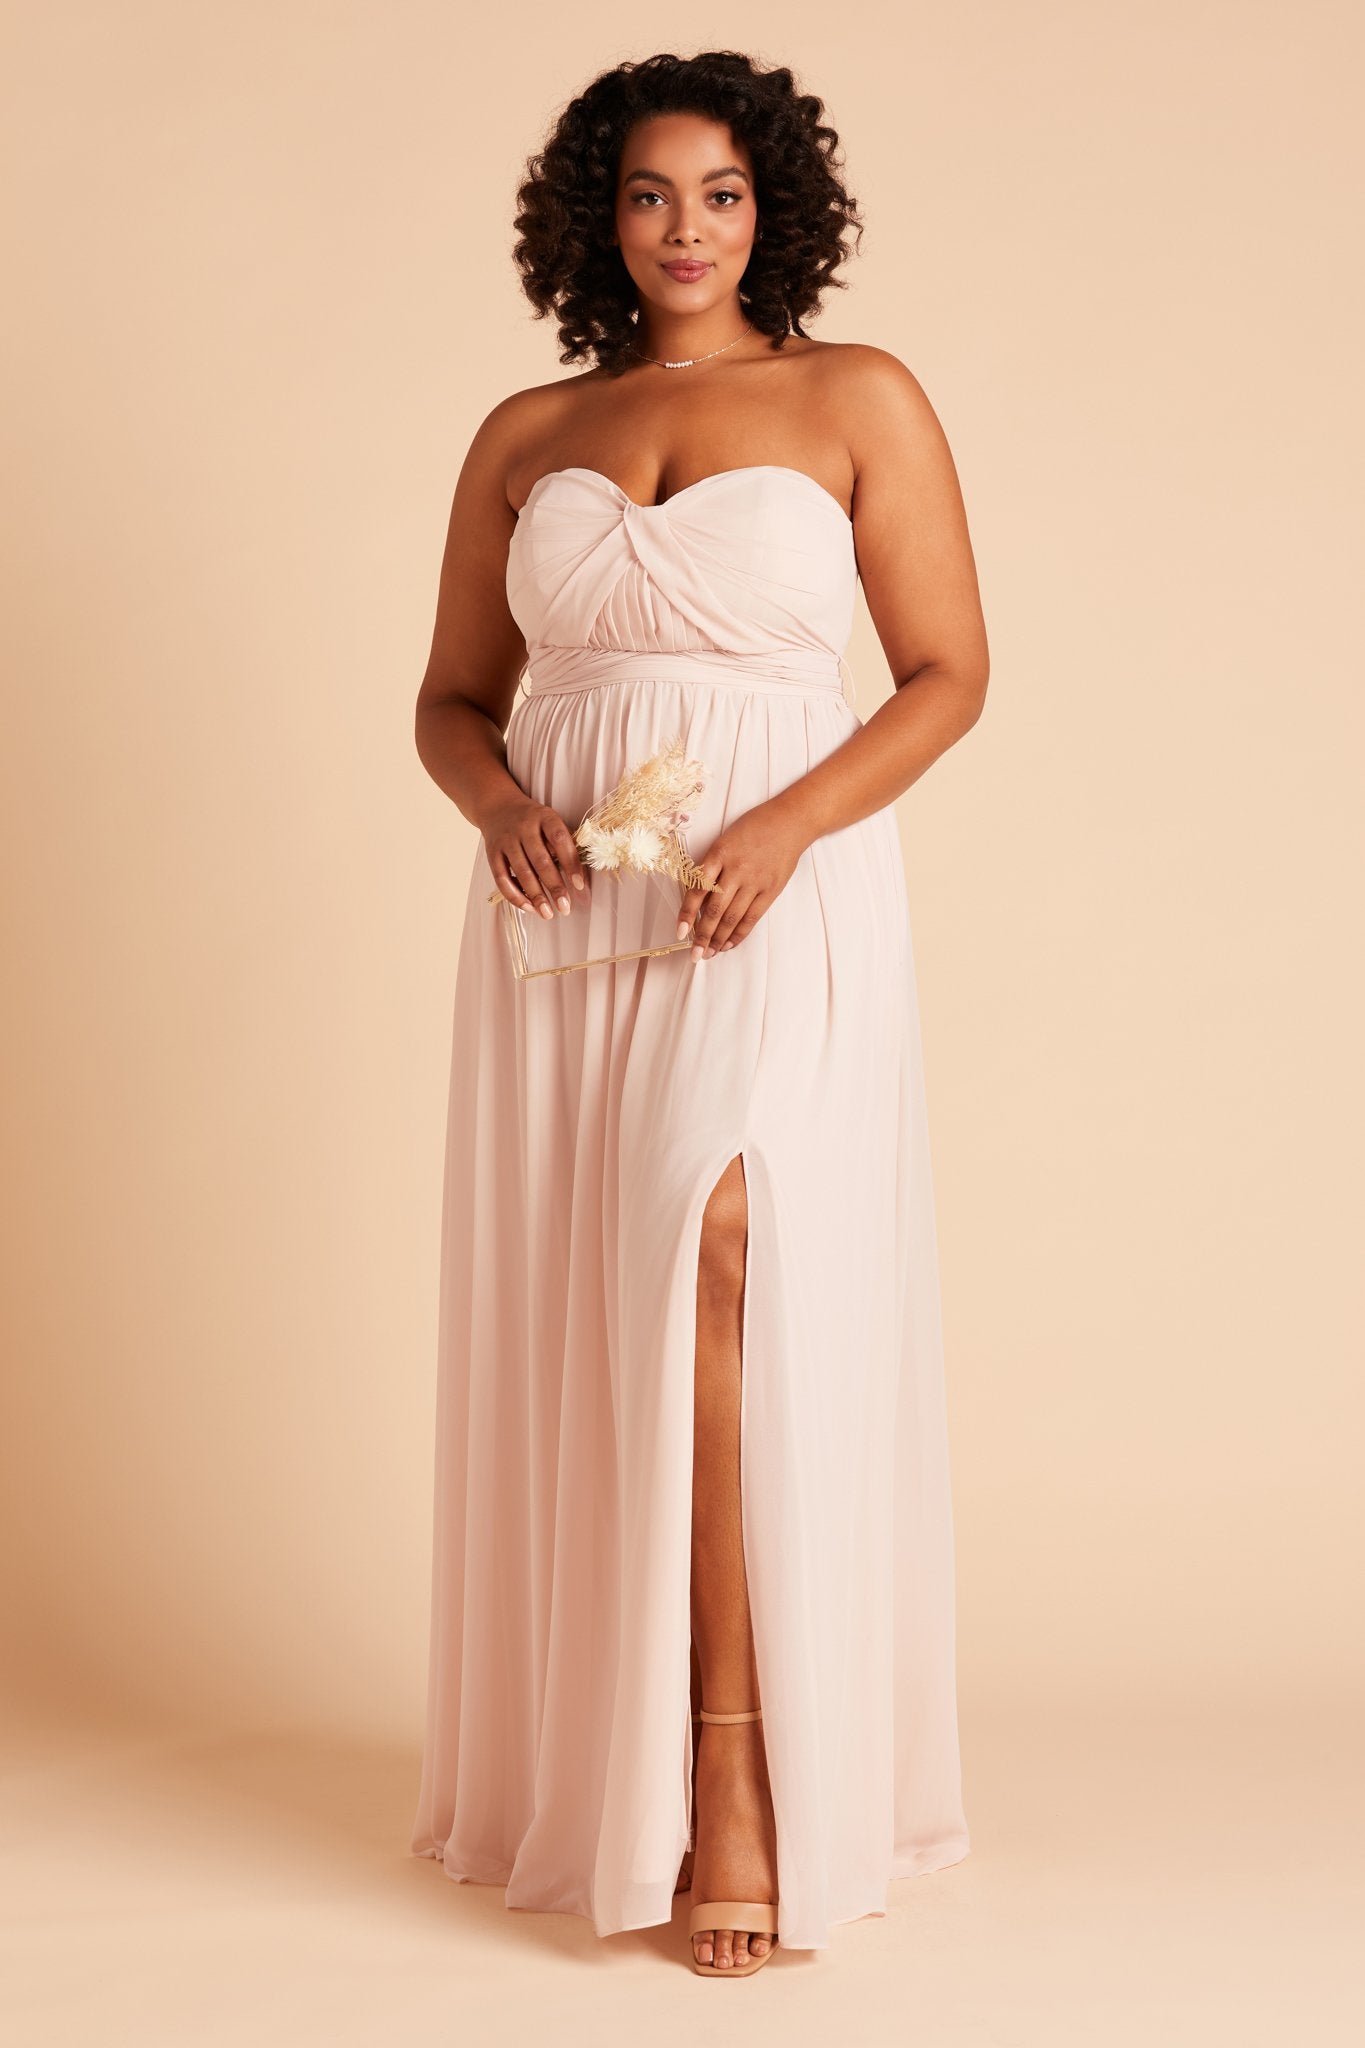 Grace convertible plus size bridesmaid dress in pale blush pink chiffon by Birdy Grey, front view